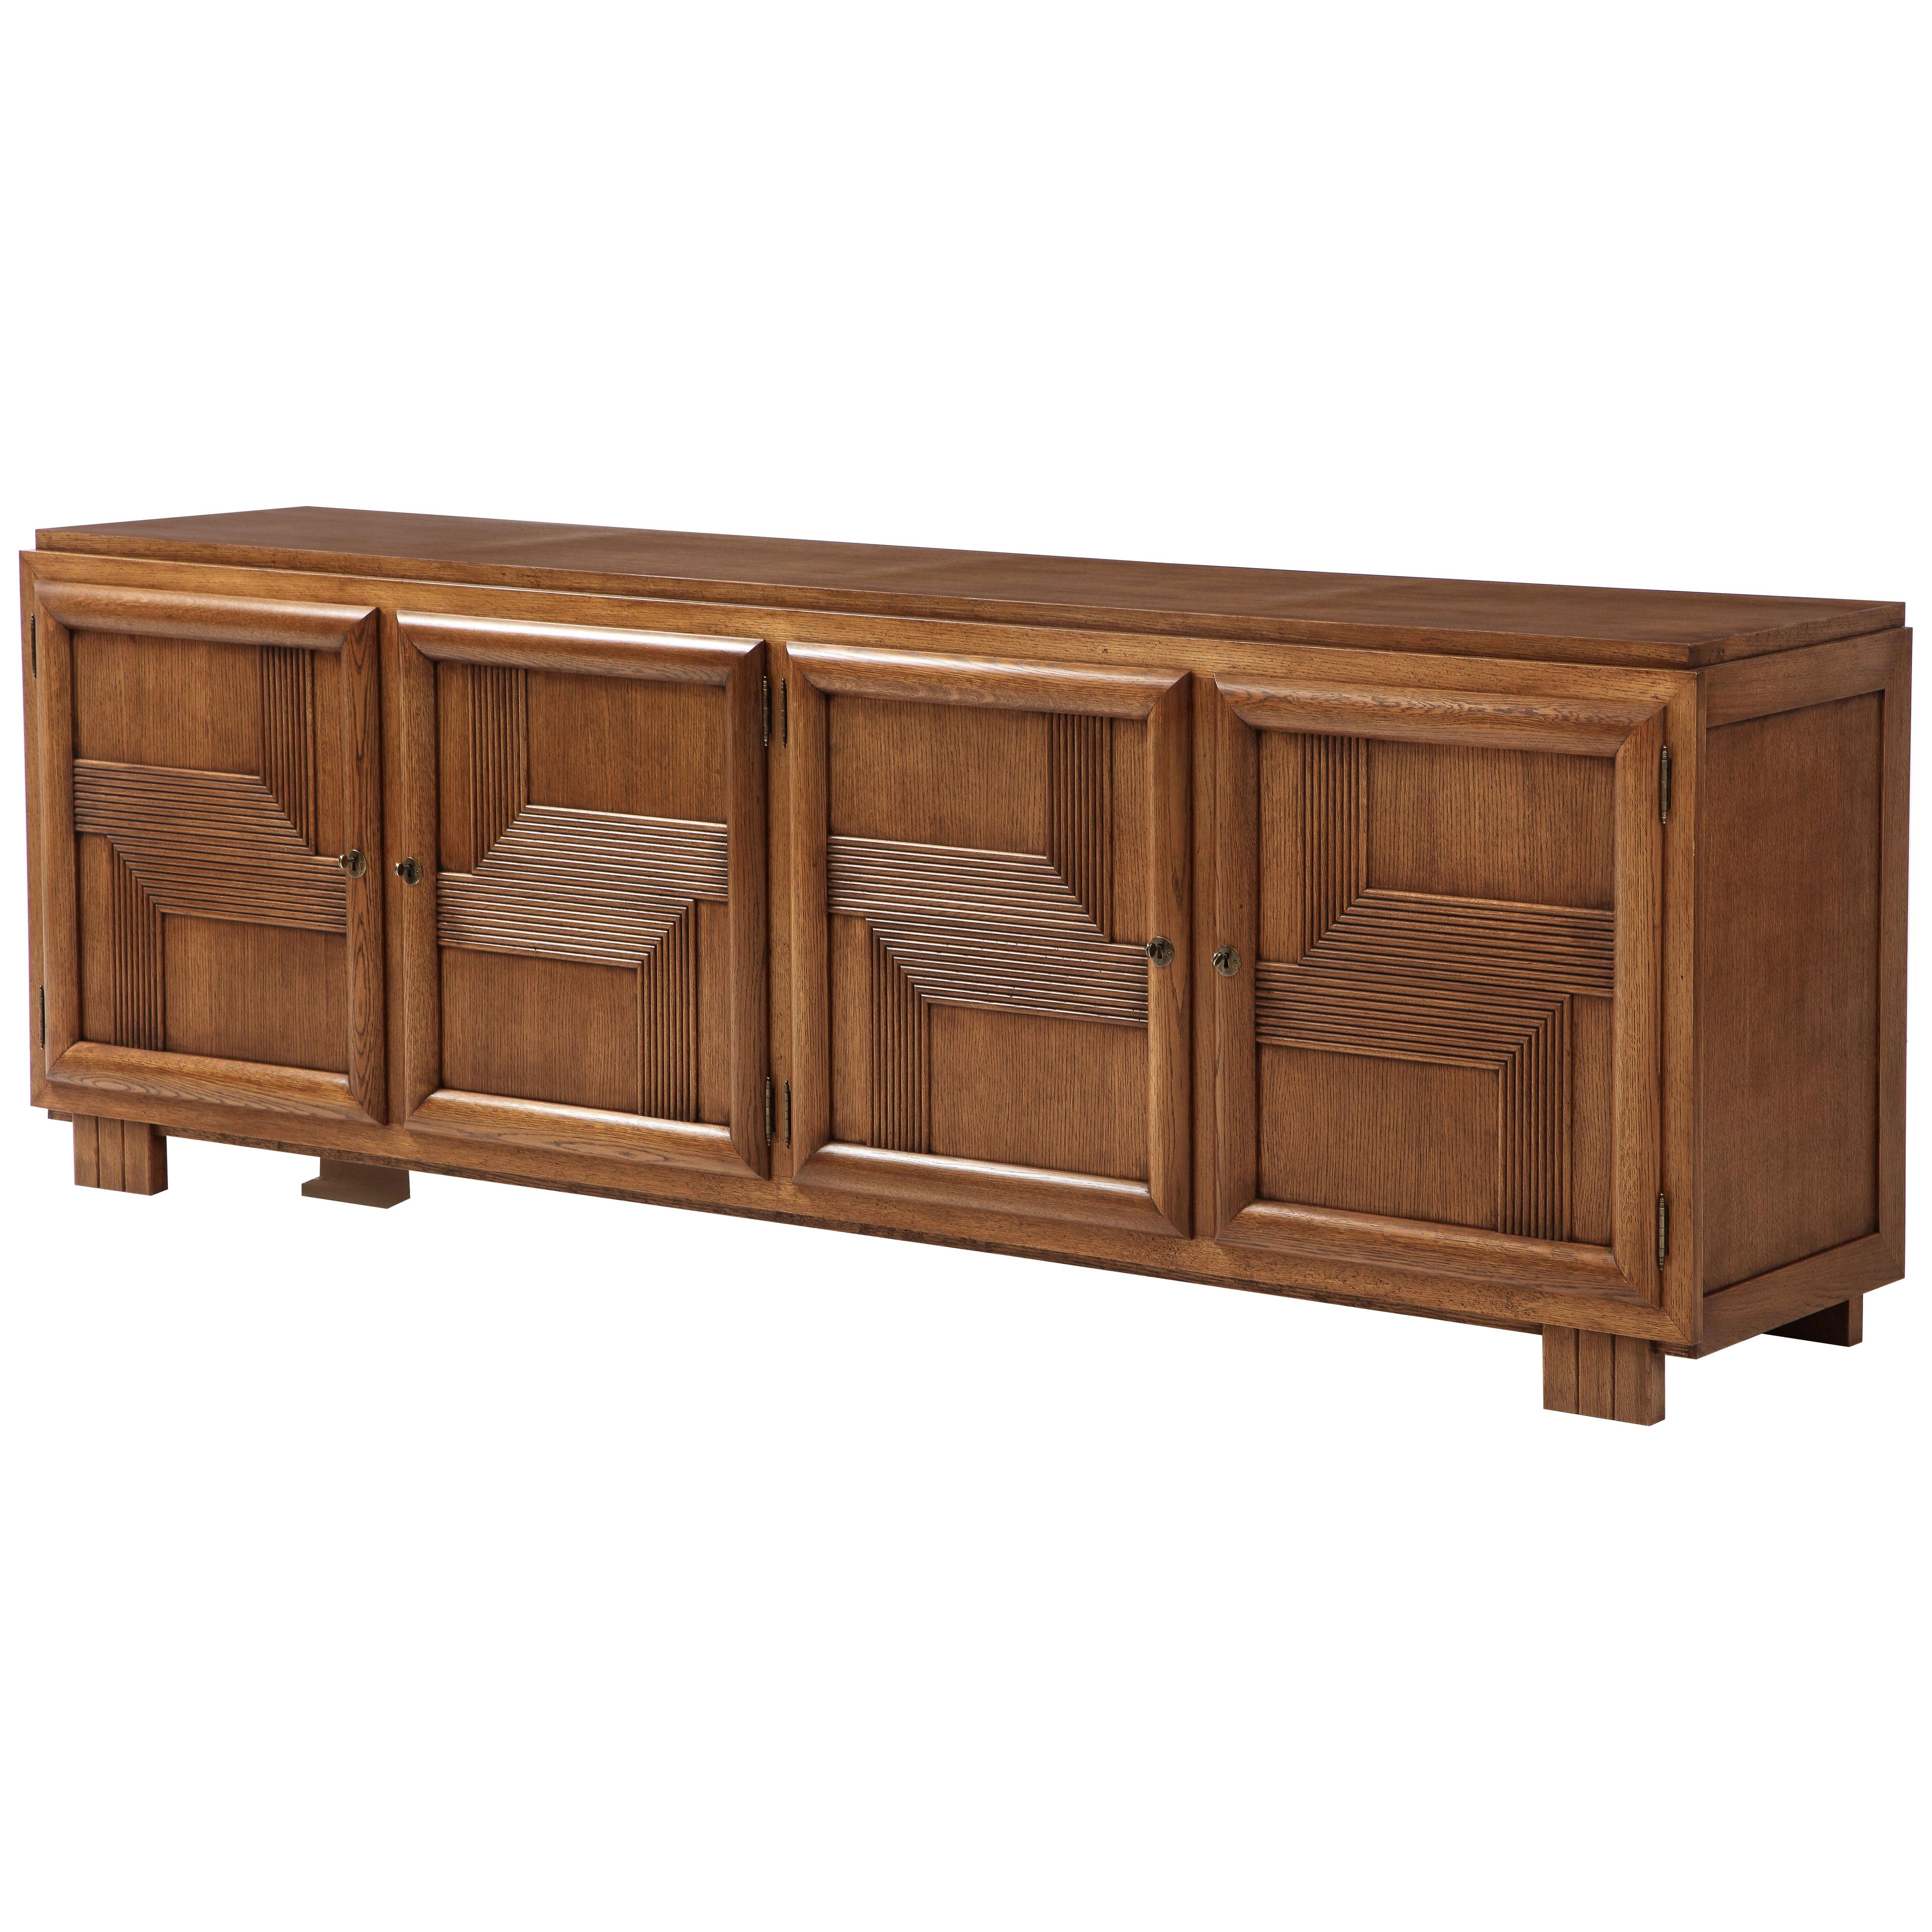 'Fredrik' Made to Order Solid Oak Handcrafted Sideboard